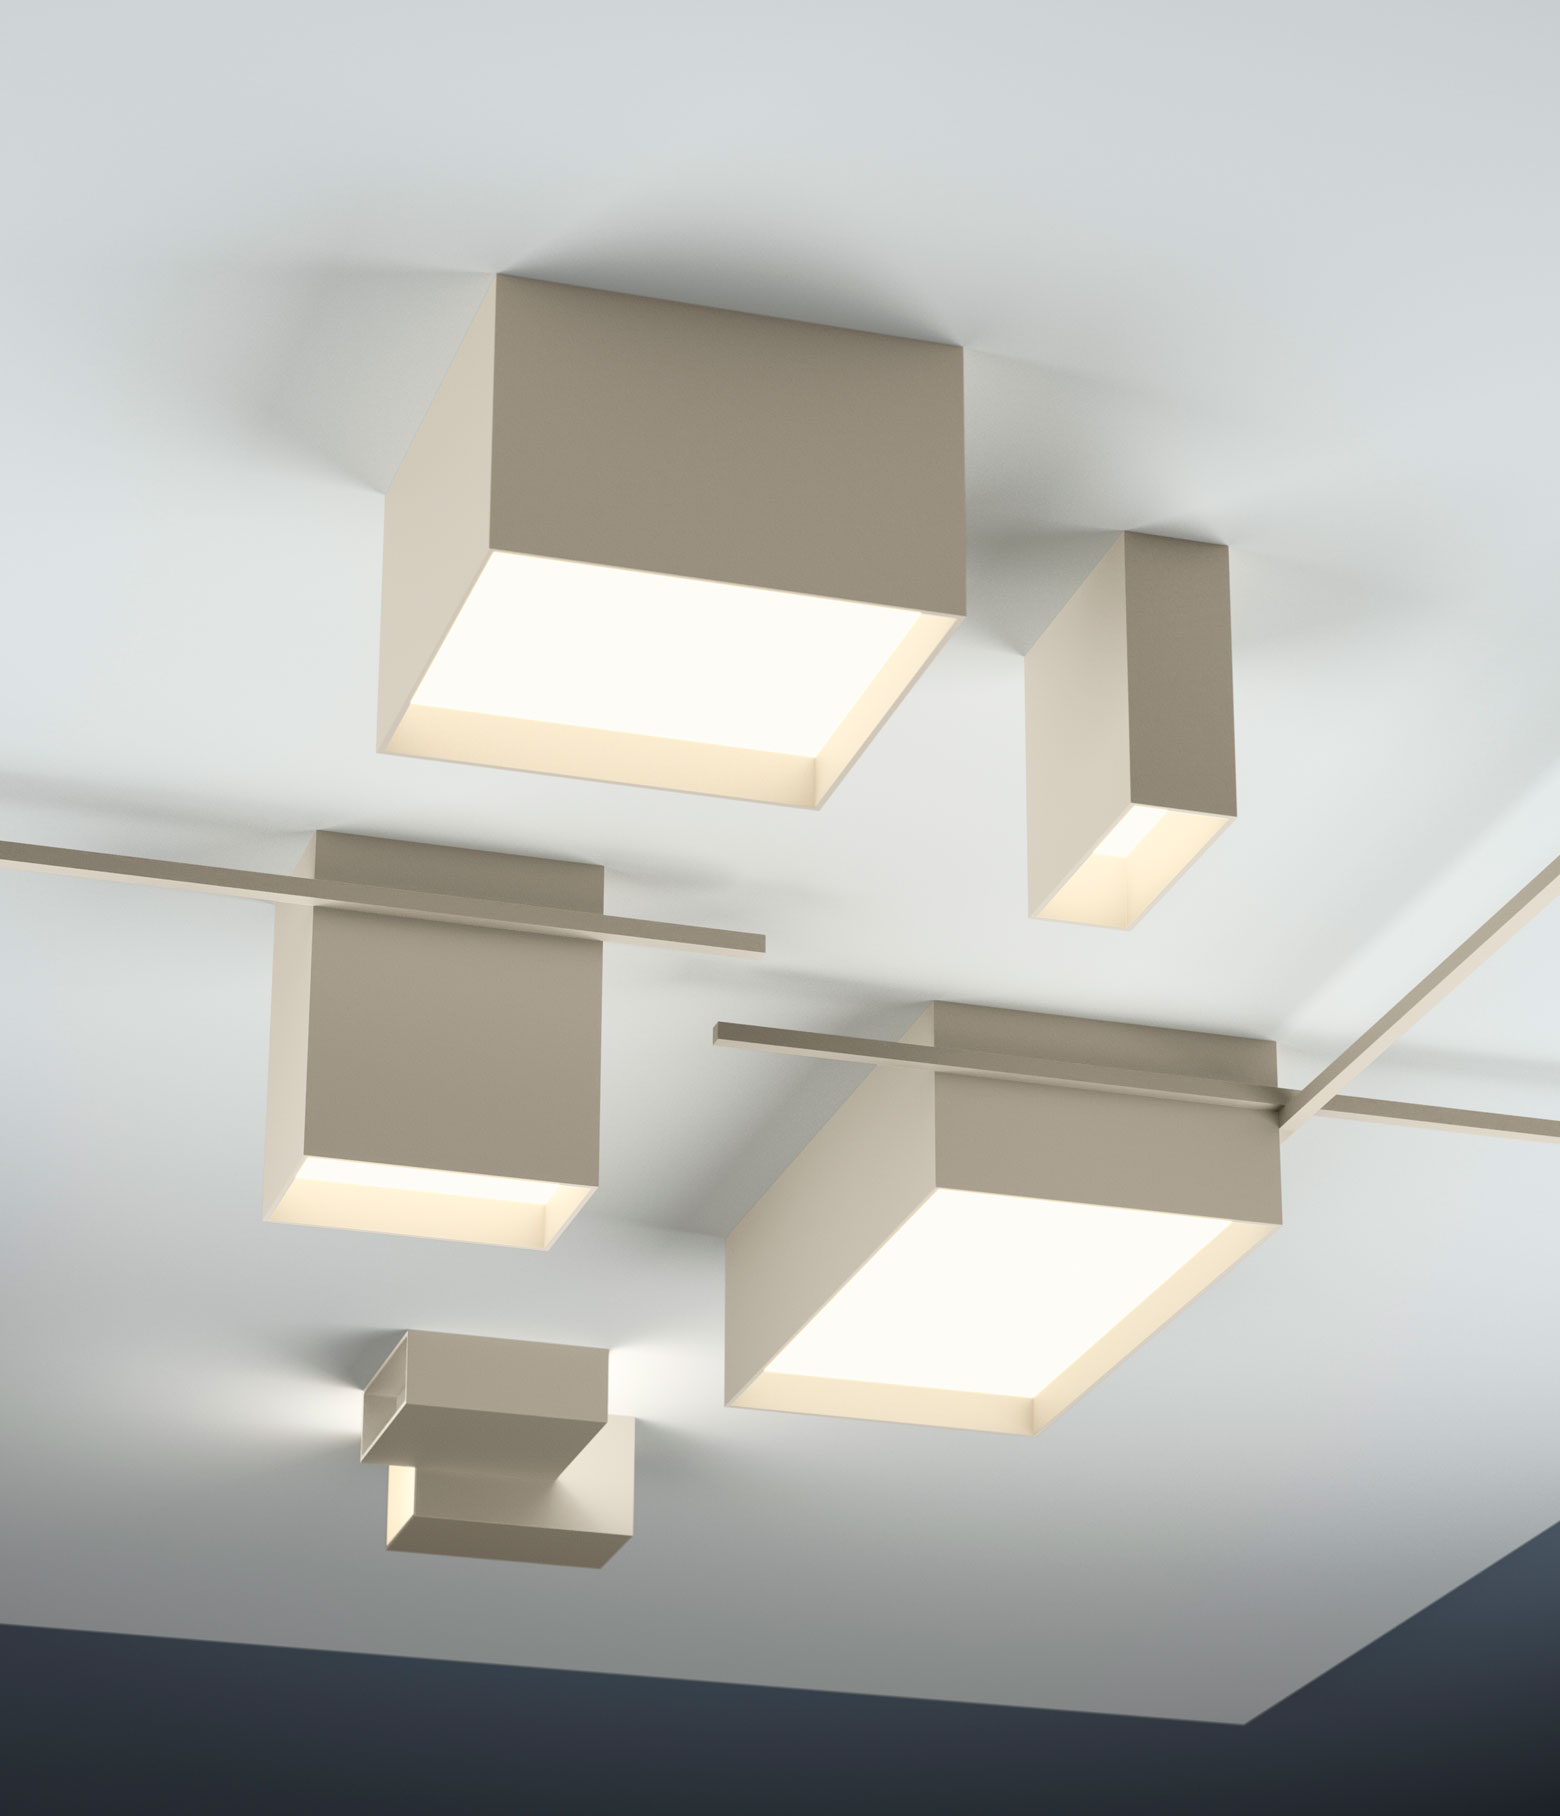 Vibia - The Edit - Introducing Arik Levy’s Structural Ceiling Light for Vibia